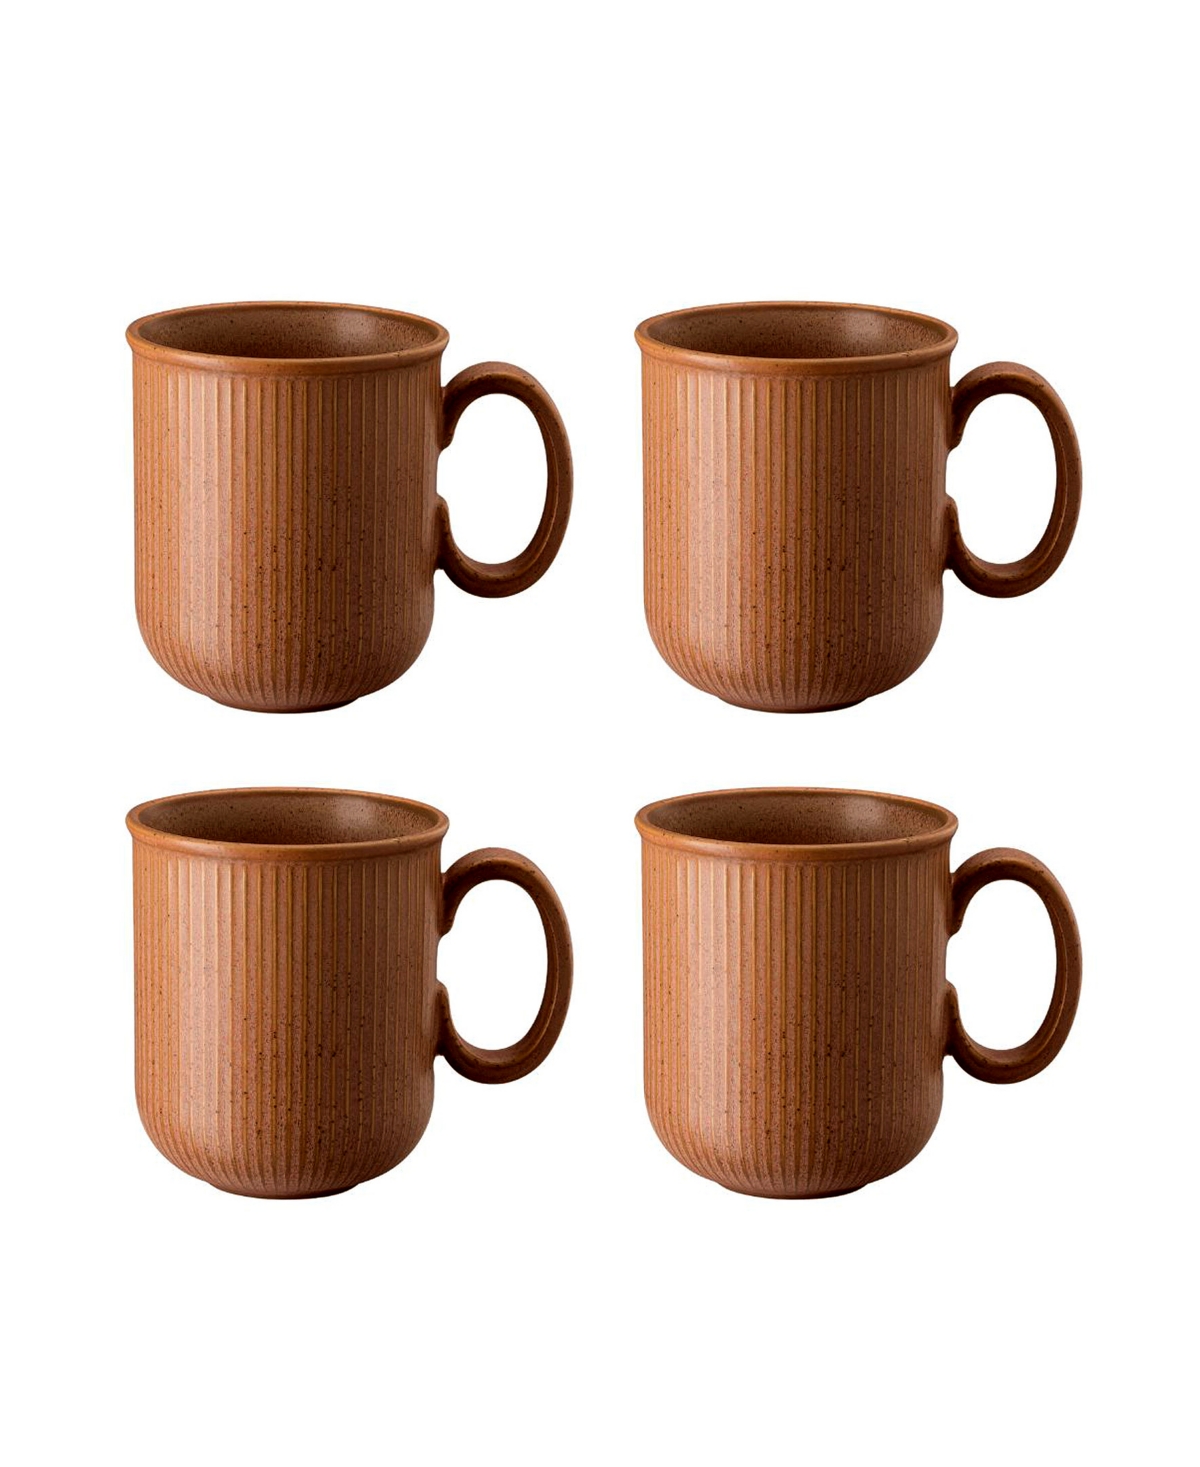 Clay Set of 4 Mugs, Service for 4 - Earth